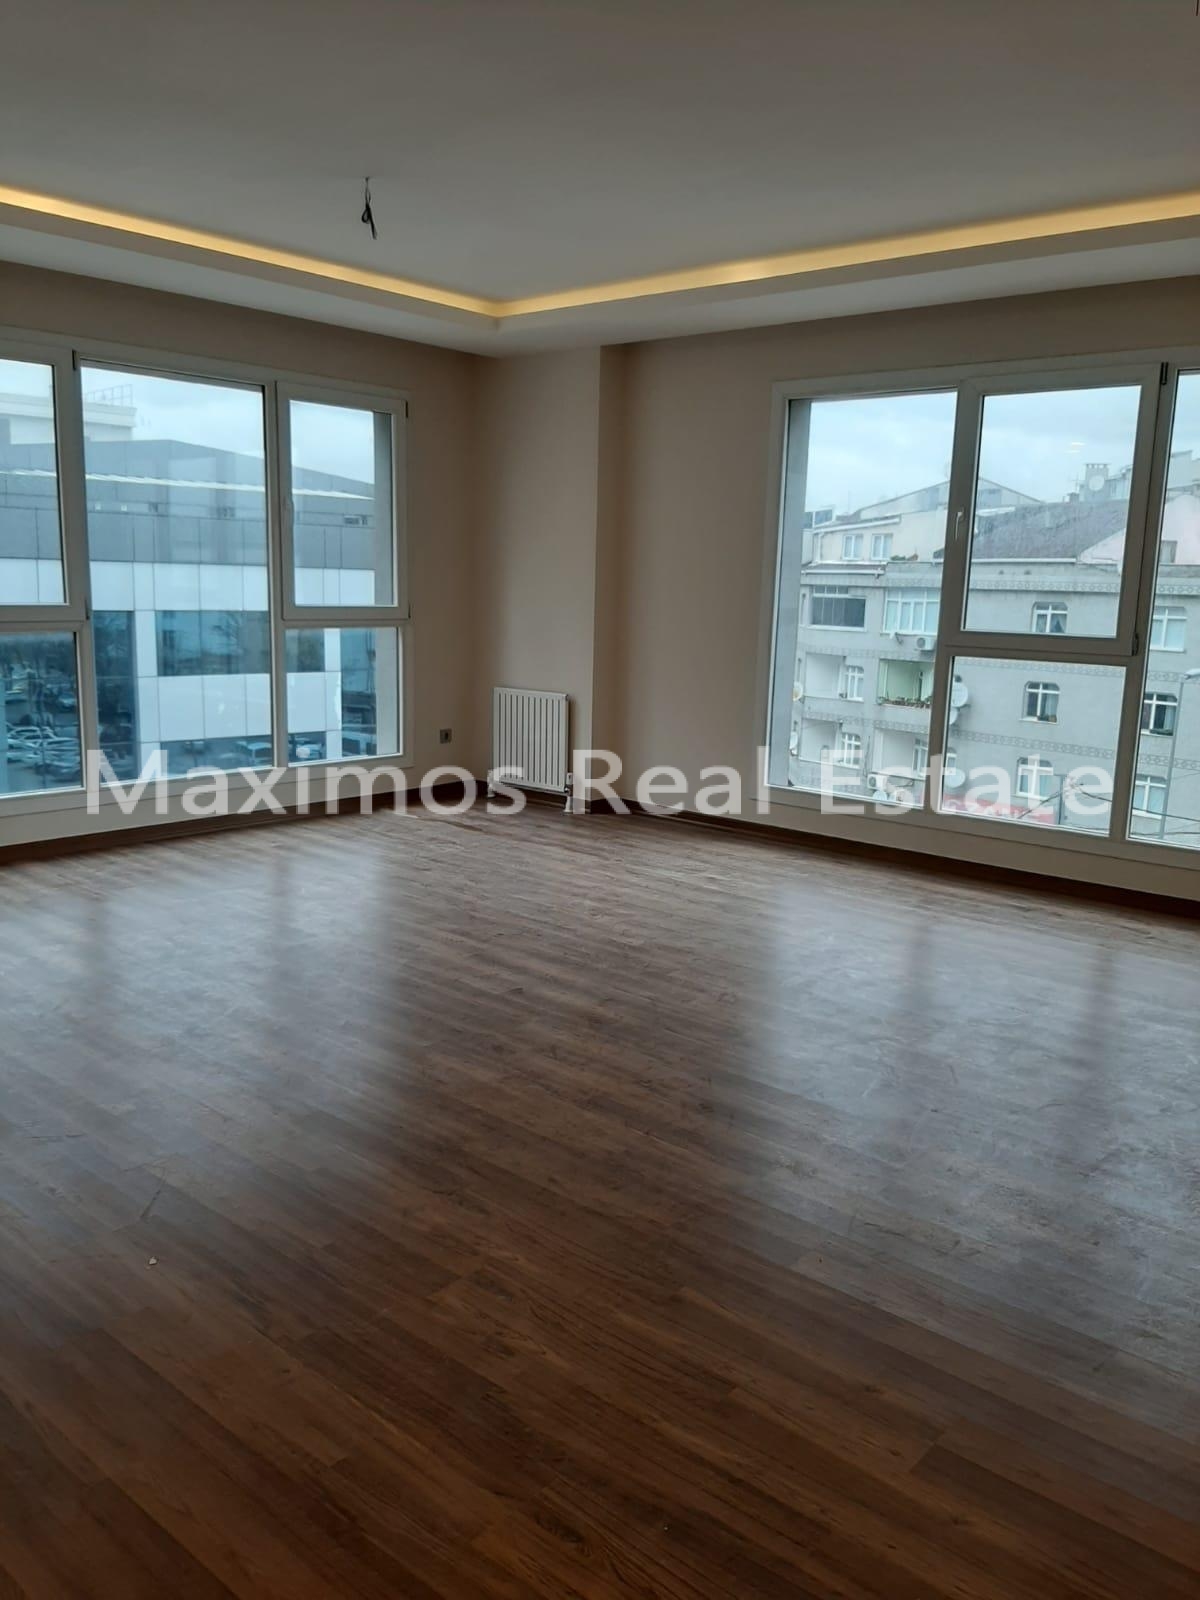 Property for Sale in Avcilar Istanbul Turkey photos #1